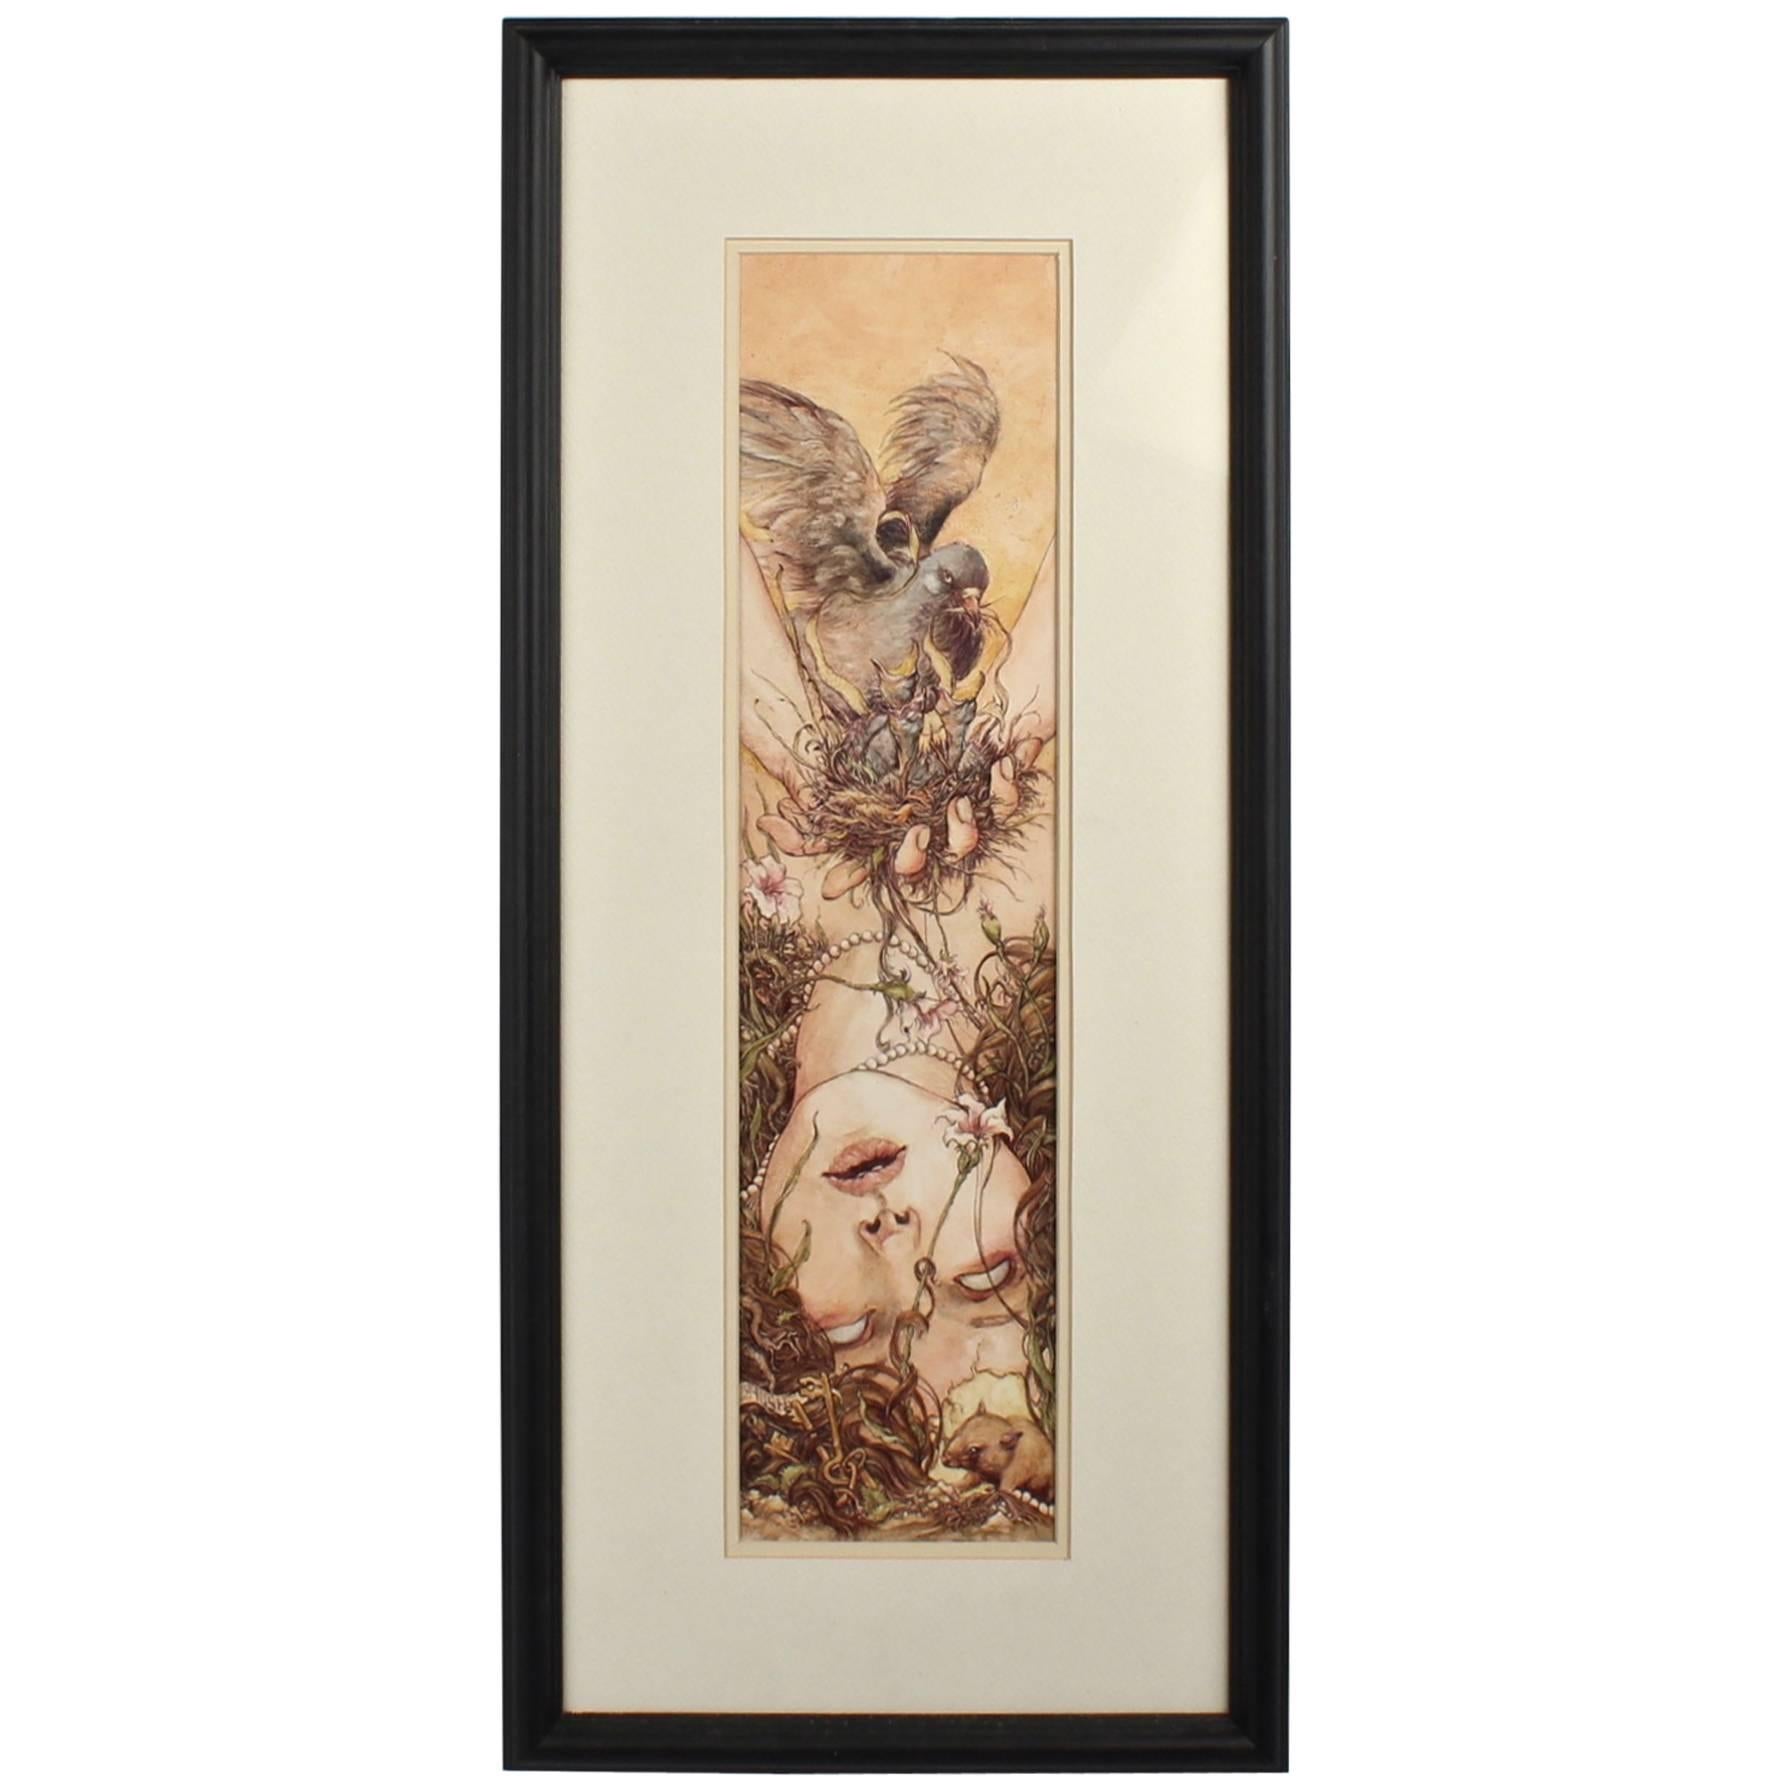 Husk, a Biro, Watercolor and Gouache Painting by Jeremy Hush, 2013 For Sale